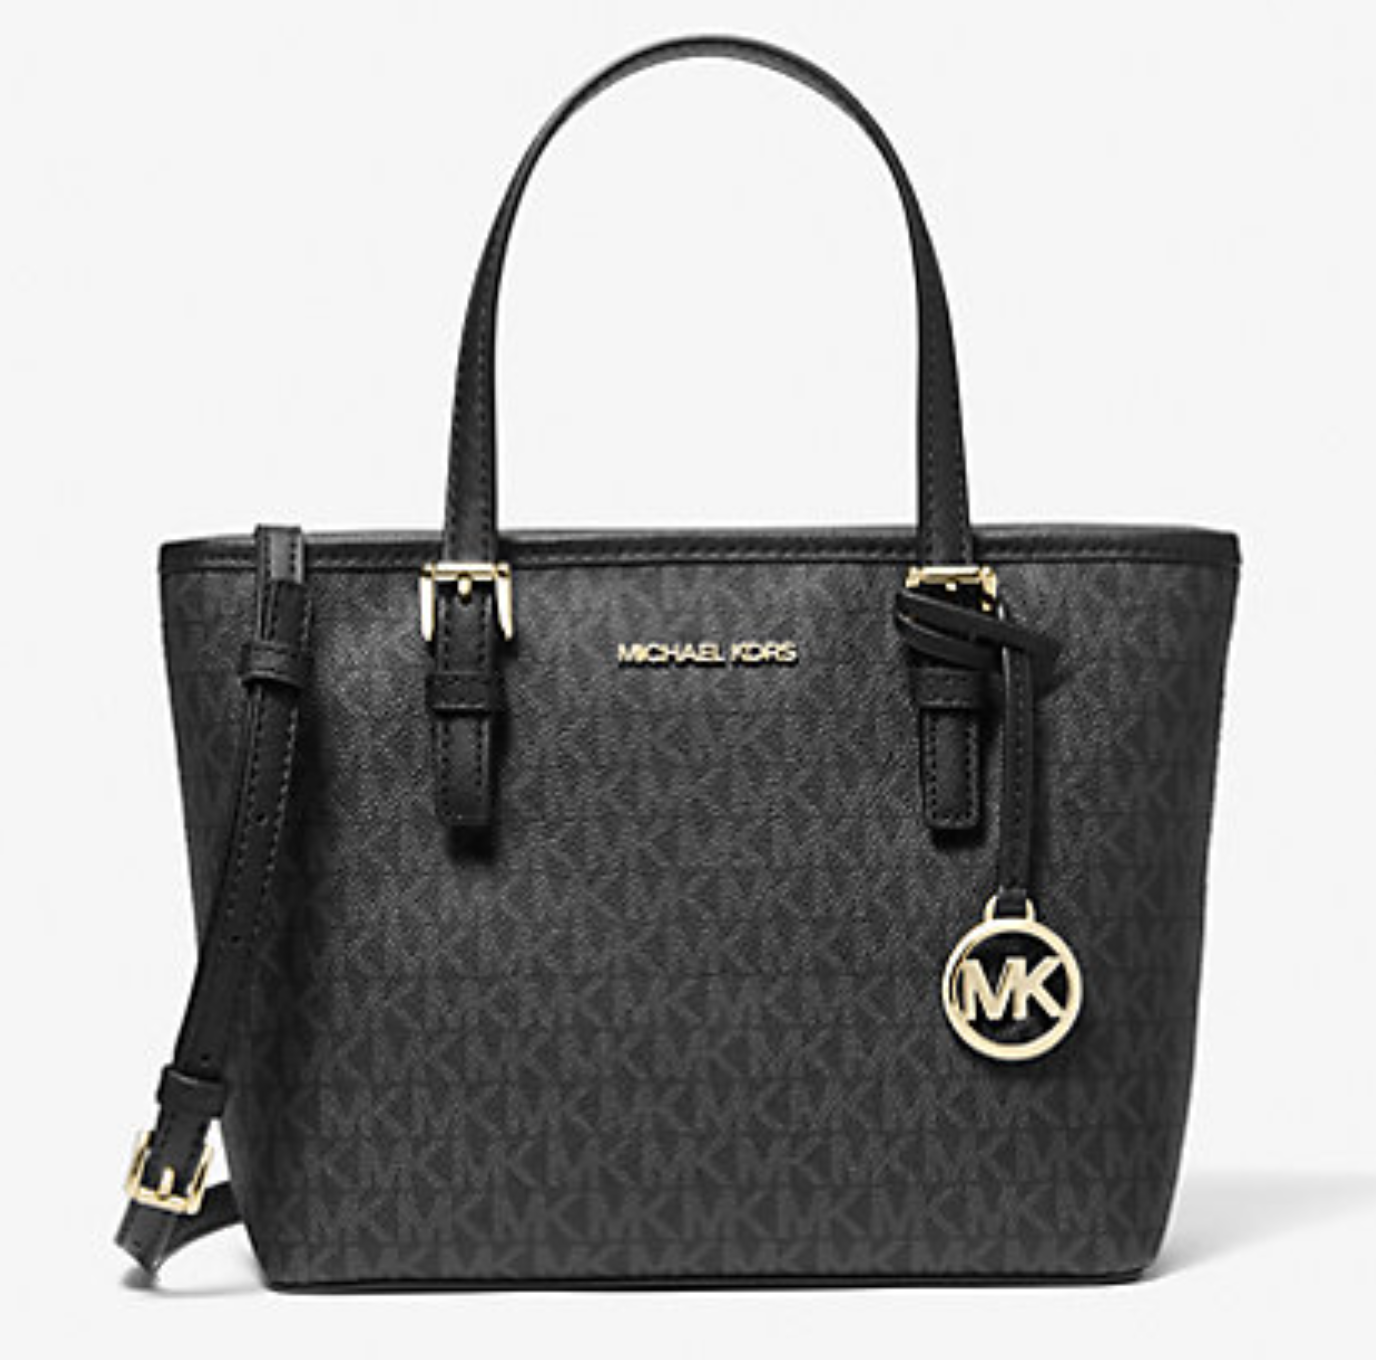 Michael Kors Just Launched a 70% Off Sale — 11 Best Bags and Shoes to Buy ASAP